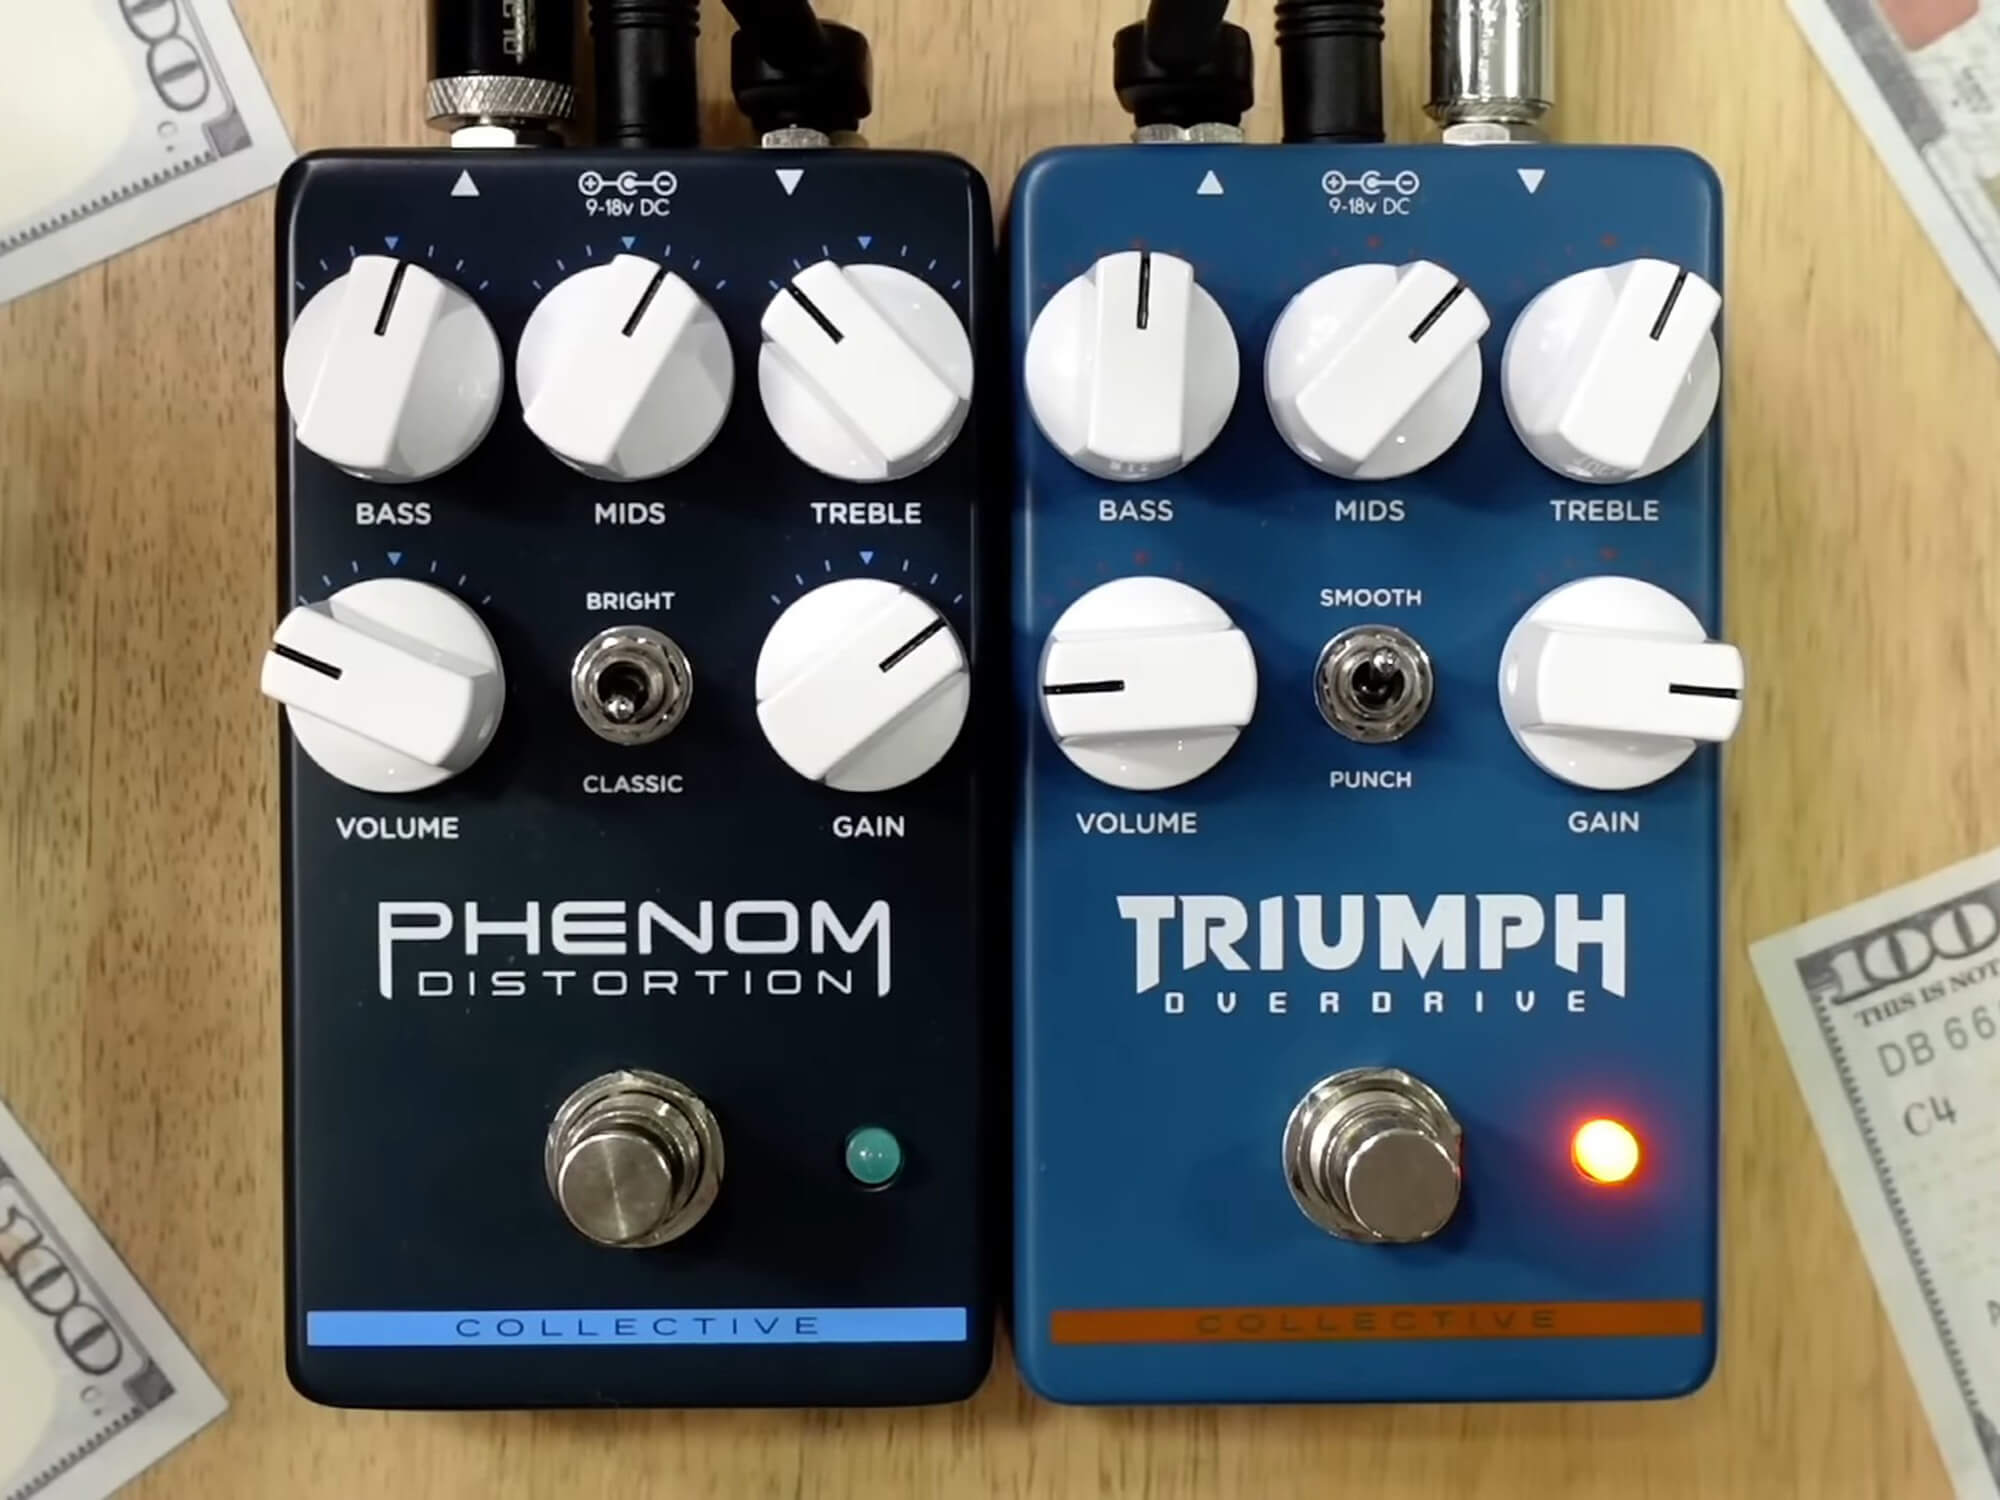 [L-R] Wampler Phenom and Triumph pedals